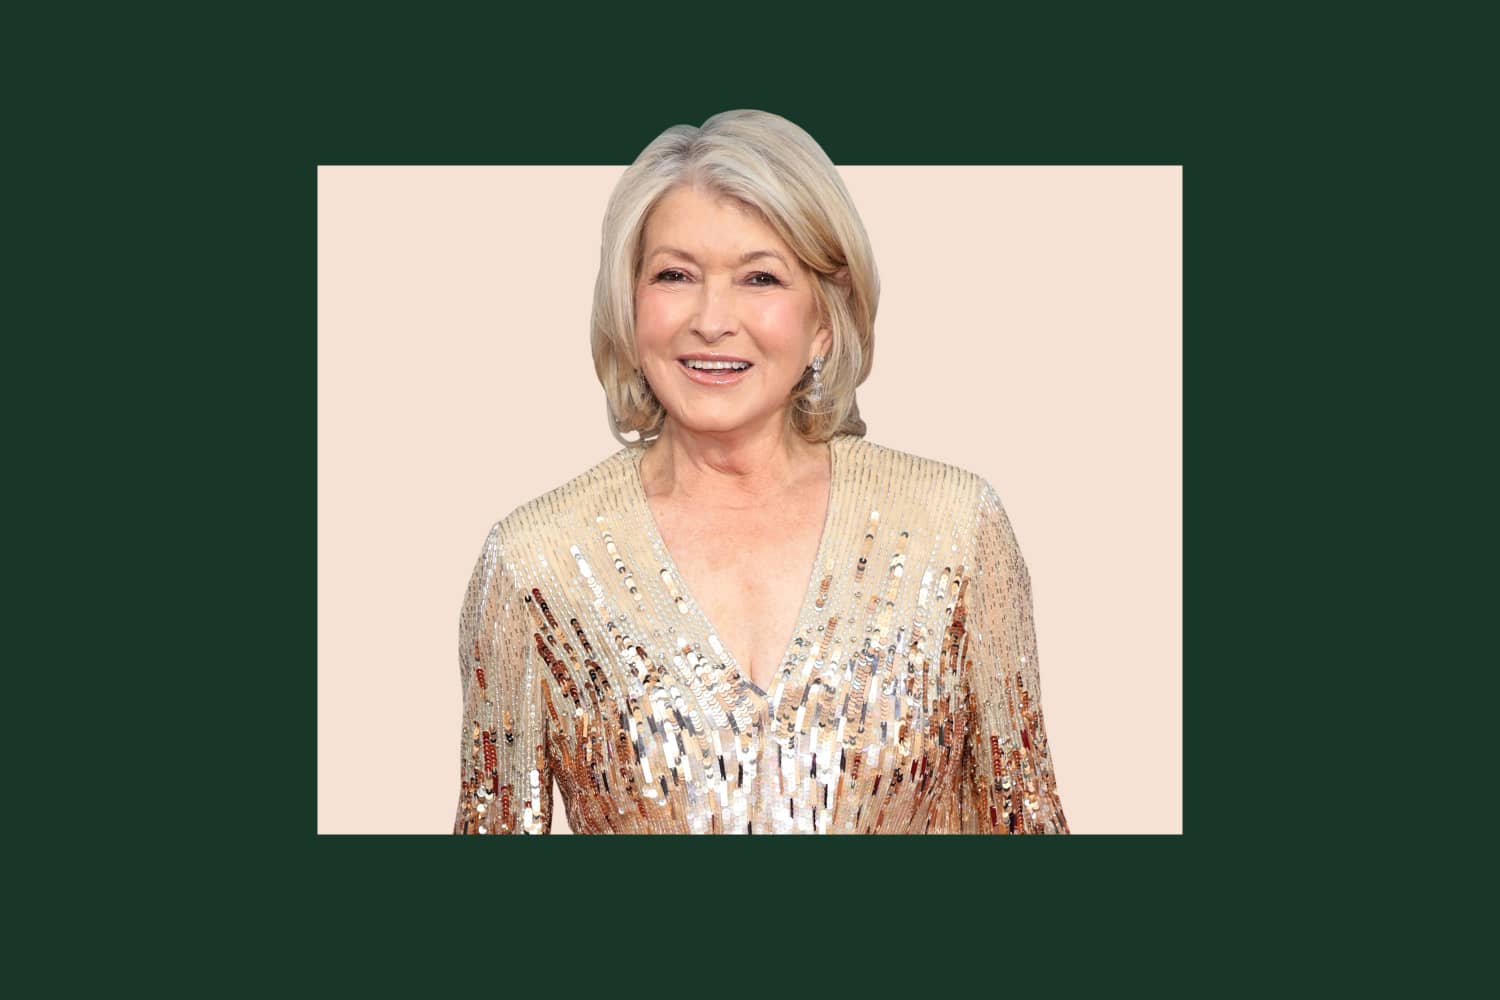 The Gorgeous Green Vintage Collection Martha Stewart’s Been Growing for Decades (and Where You Can Find Your Own!)